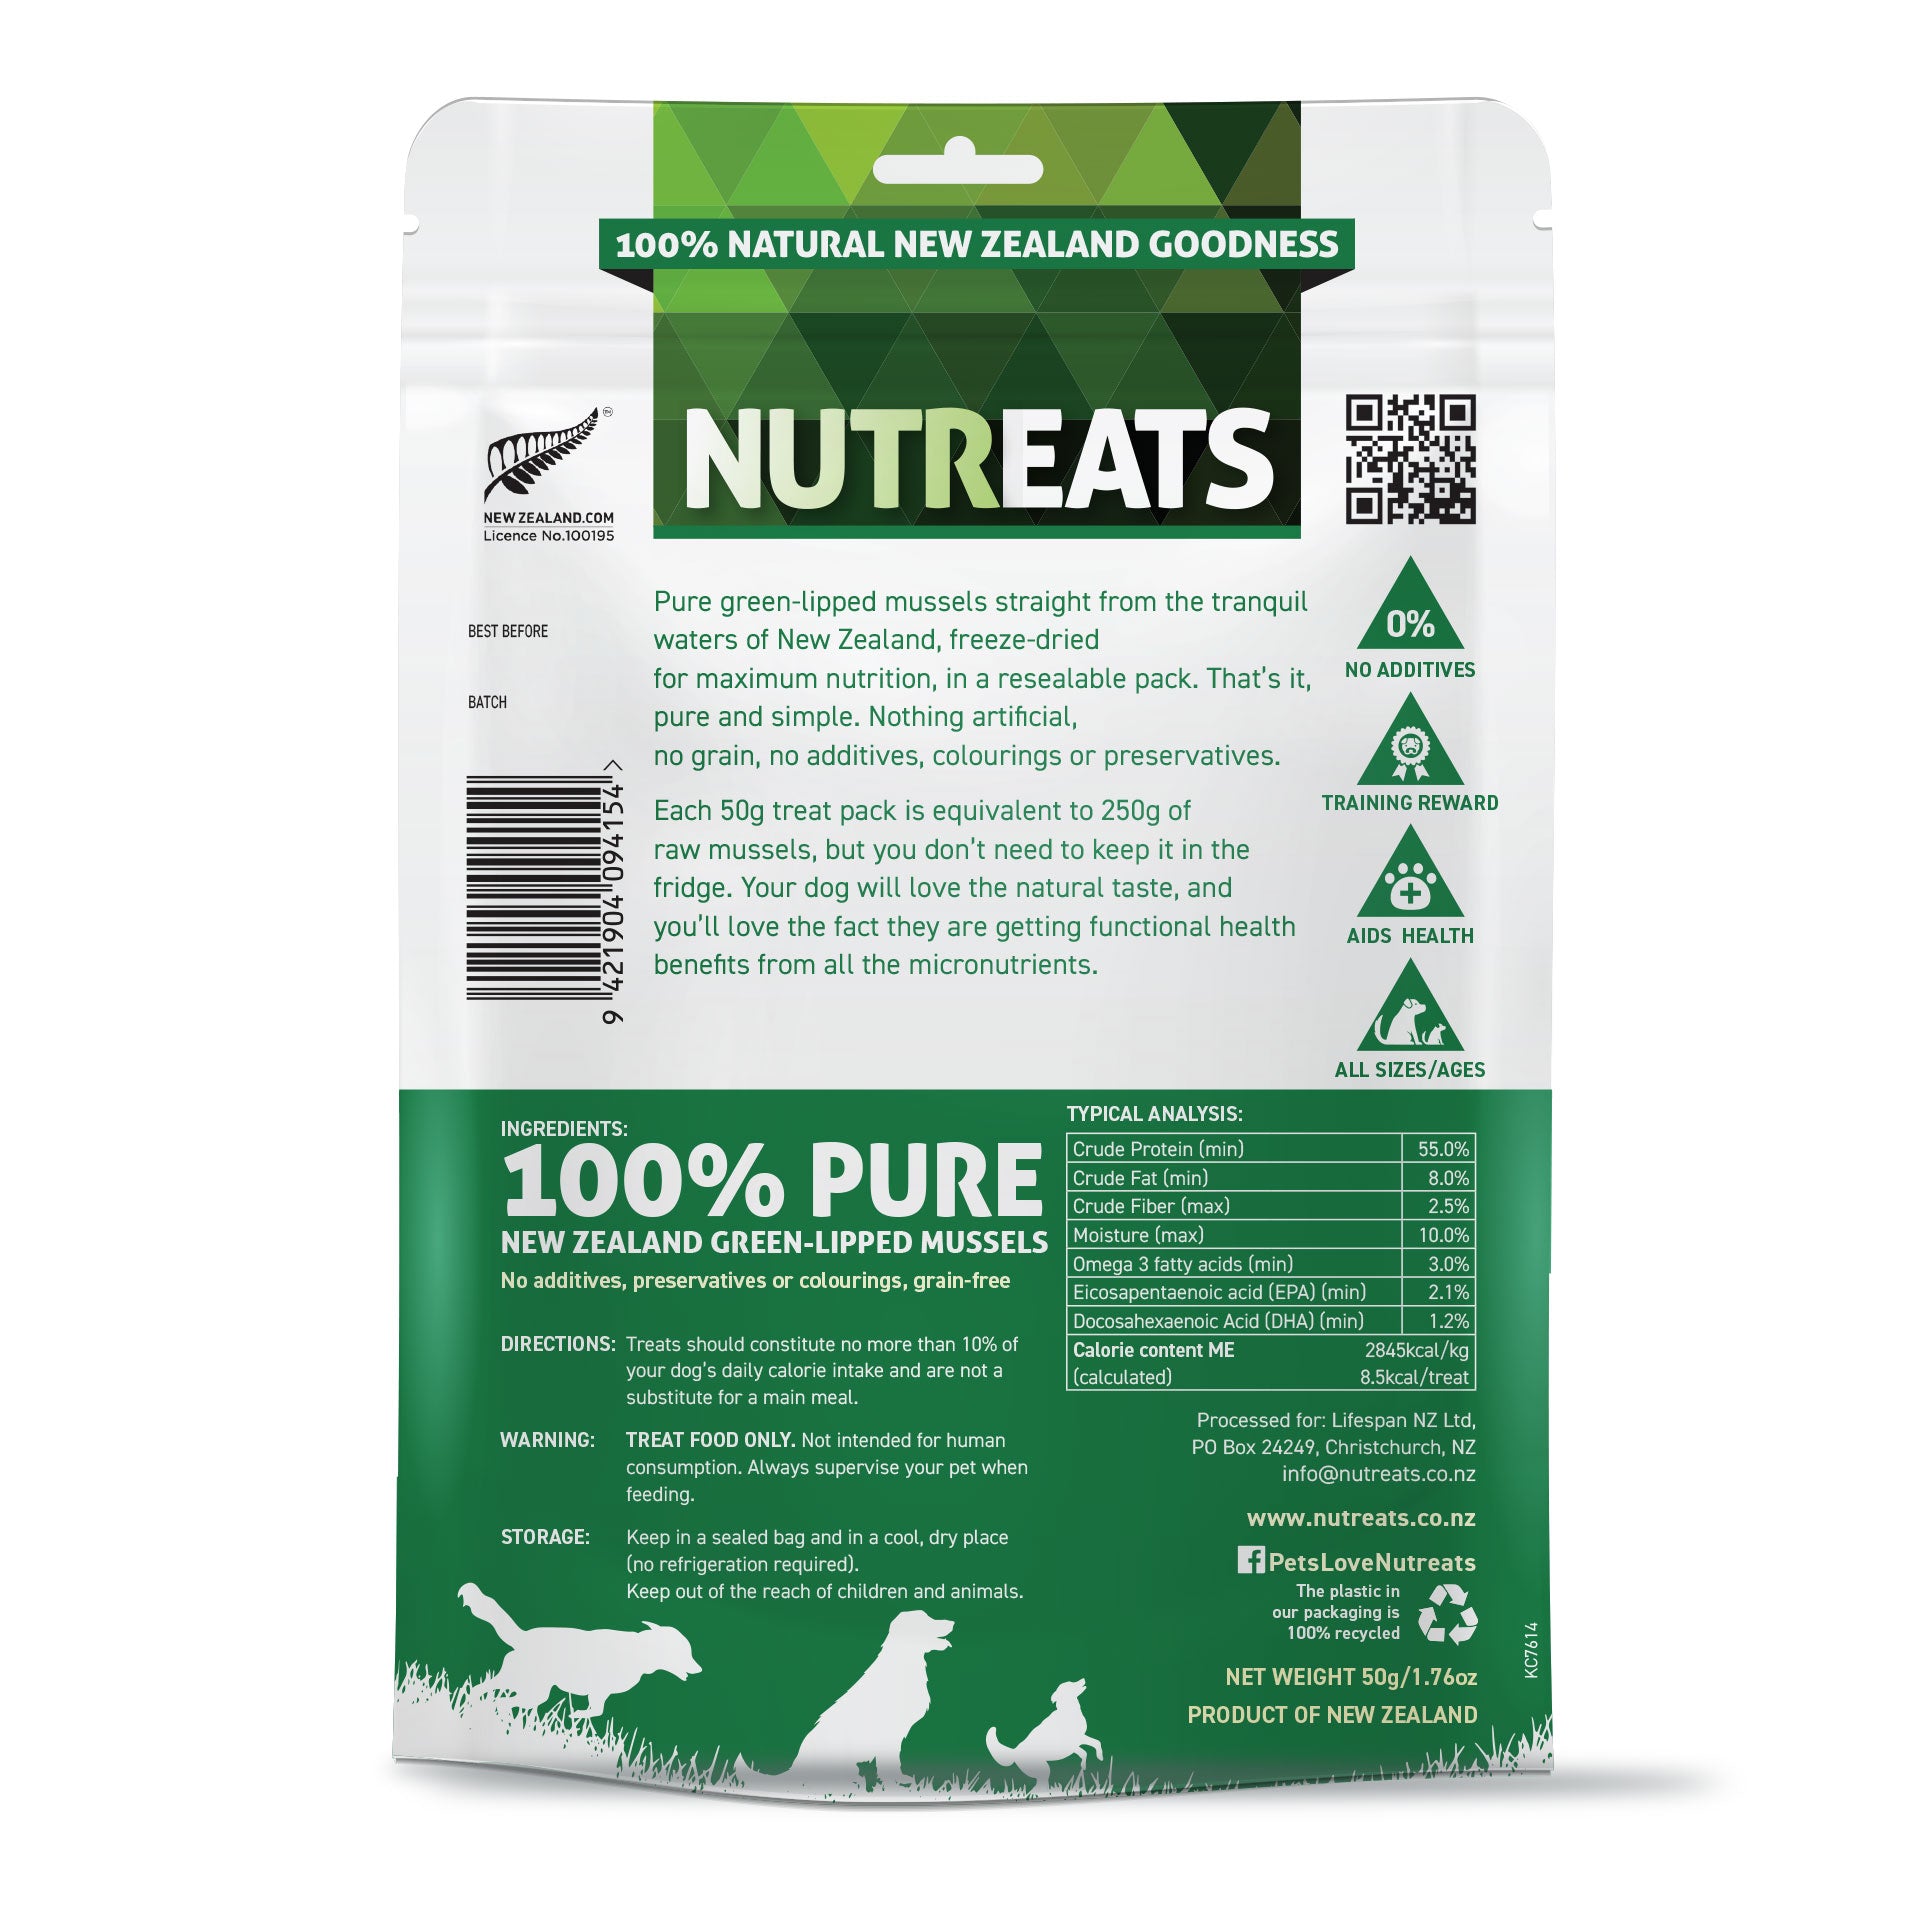 100% natural nutritional treats for dogs supporting healthy bones and joints. New Zealand Green-lipped mussels. Freeze-dried and 100% natural. Great for supporting healthy joints, ski and glossy coat and may help support immunity. Natural Omega-3 functional treats. Each pack is equivalent to 250g raw mulled meat. 